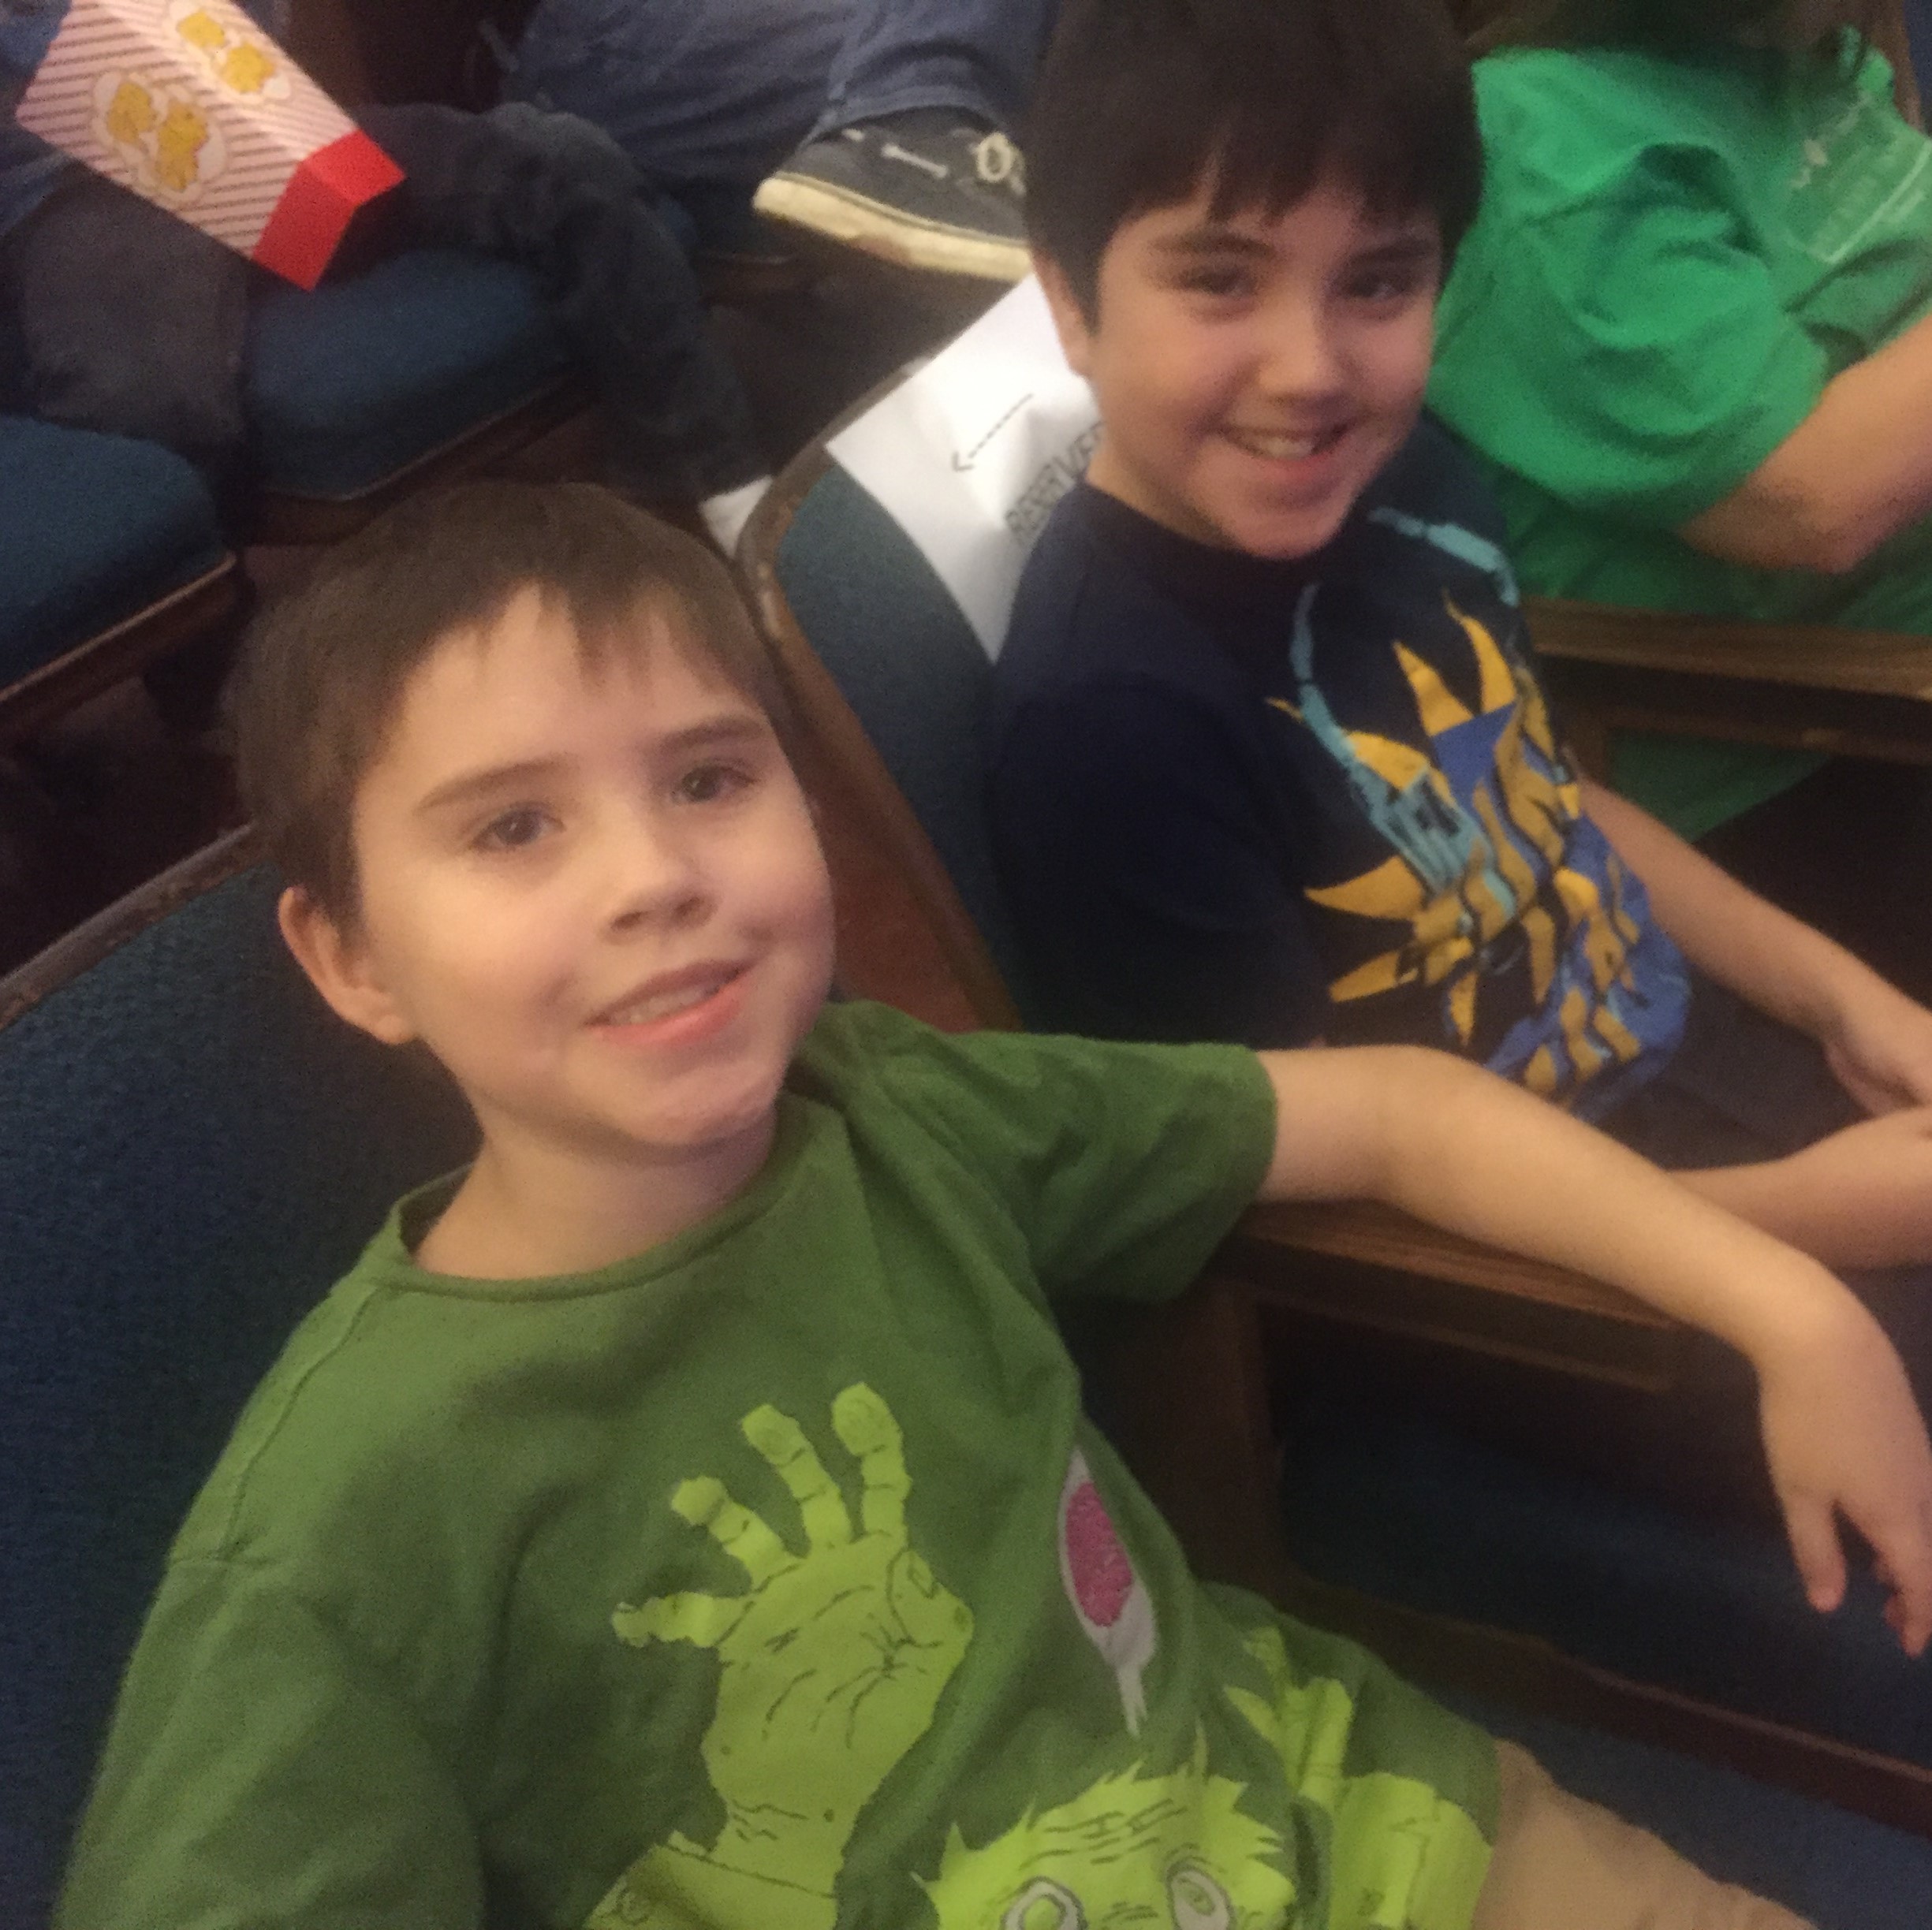 Here are the boys excitedly waiting for the show to begin.